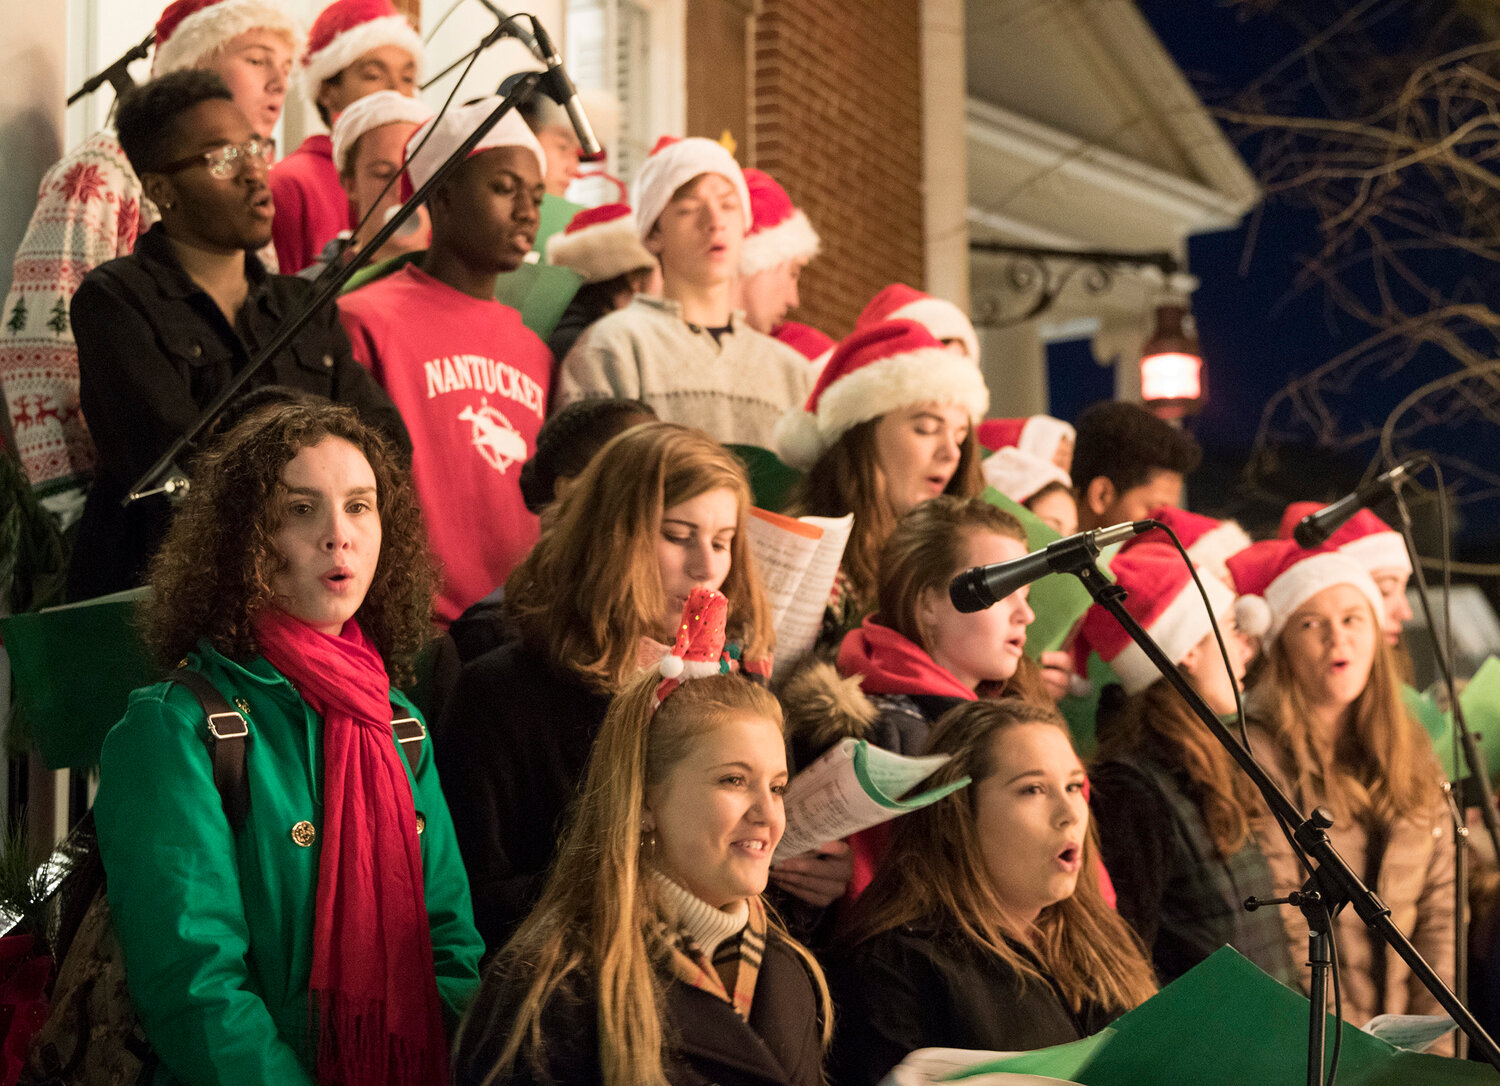 The Accidentals and Naturals, Nantucket High School’s select choral groups, sing Christmas carols on the steps of Pacific Bank during the annual tree-lighting on Main Street.